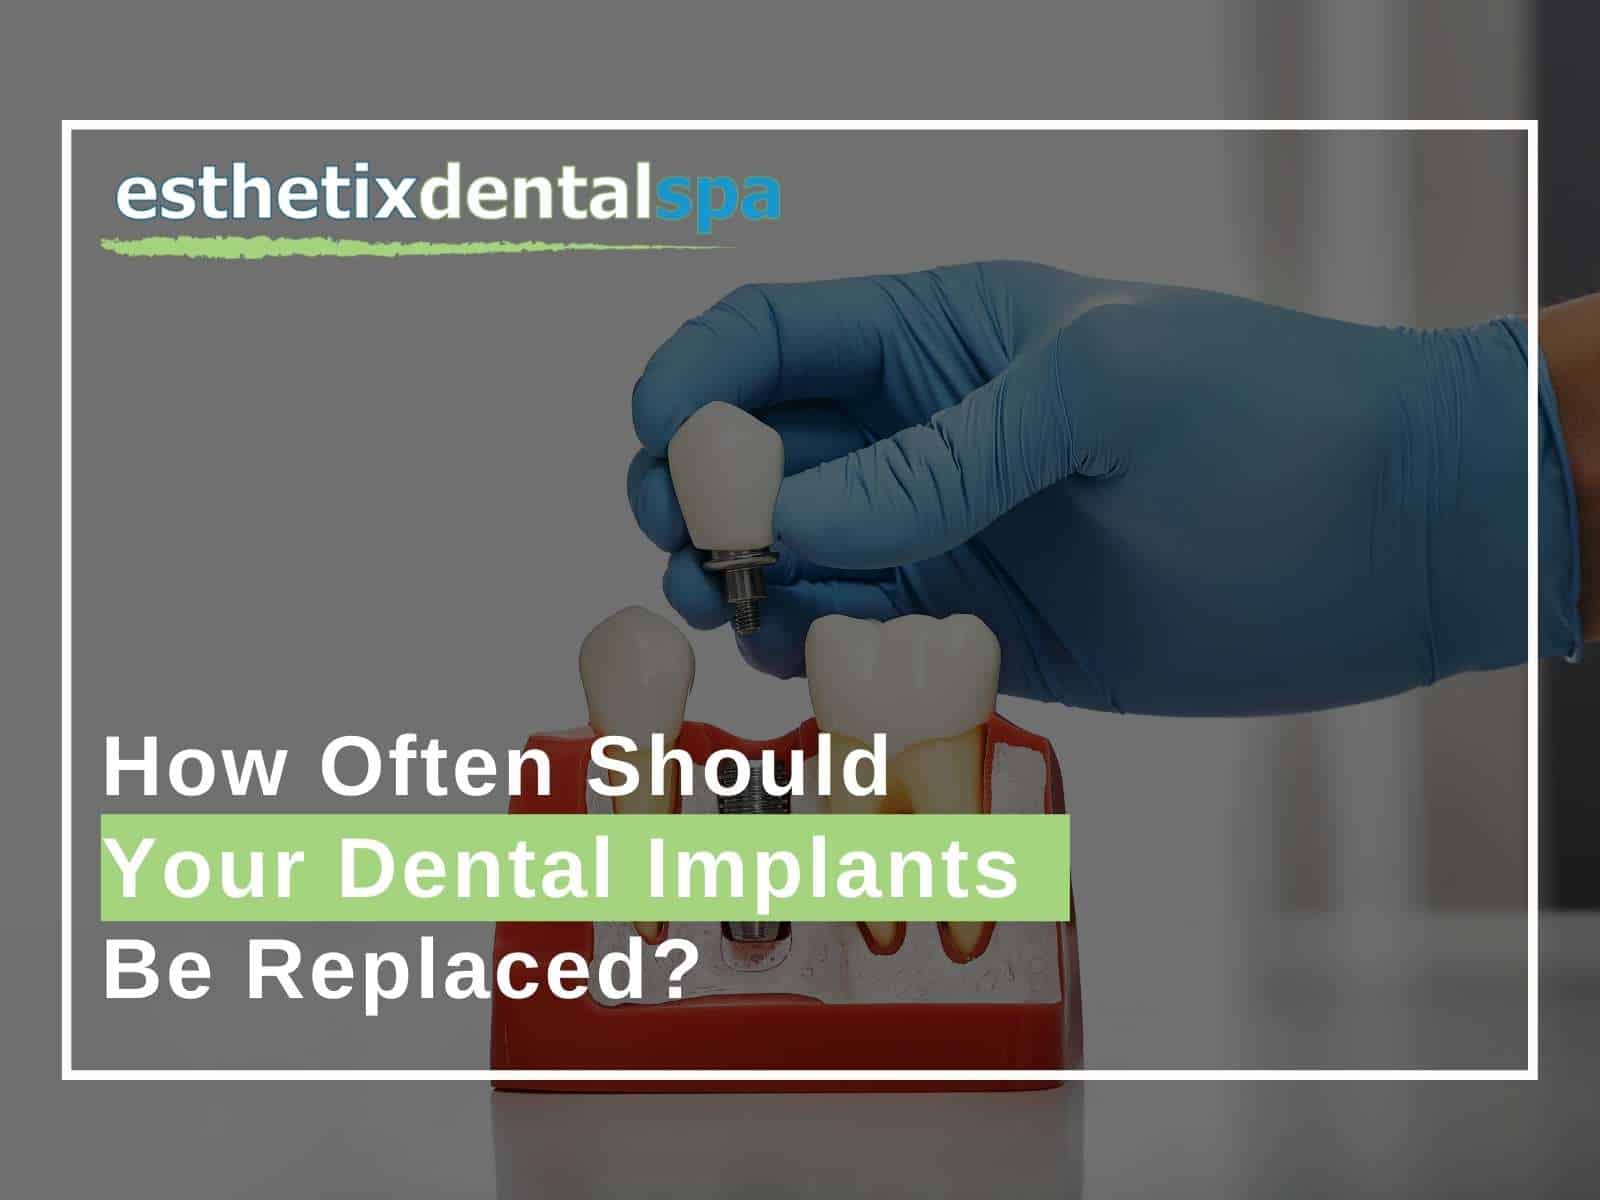 How Often Should Your Dental Implants Be Replaced?